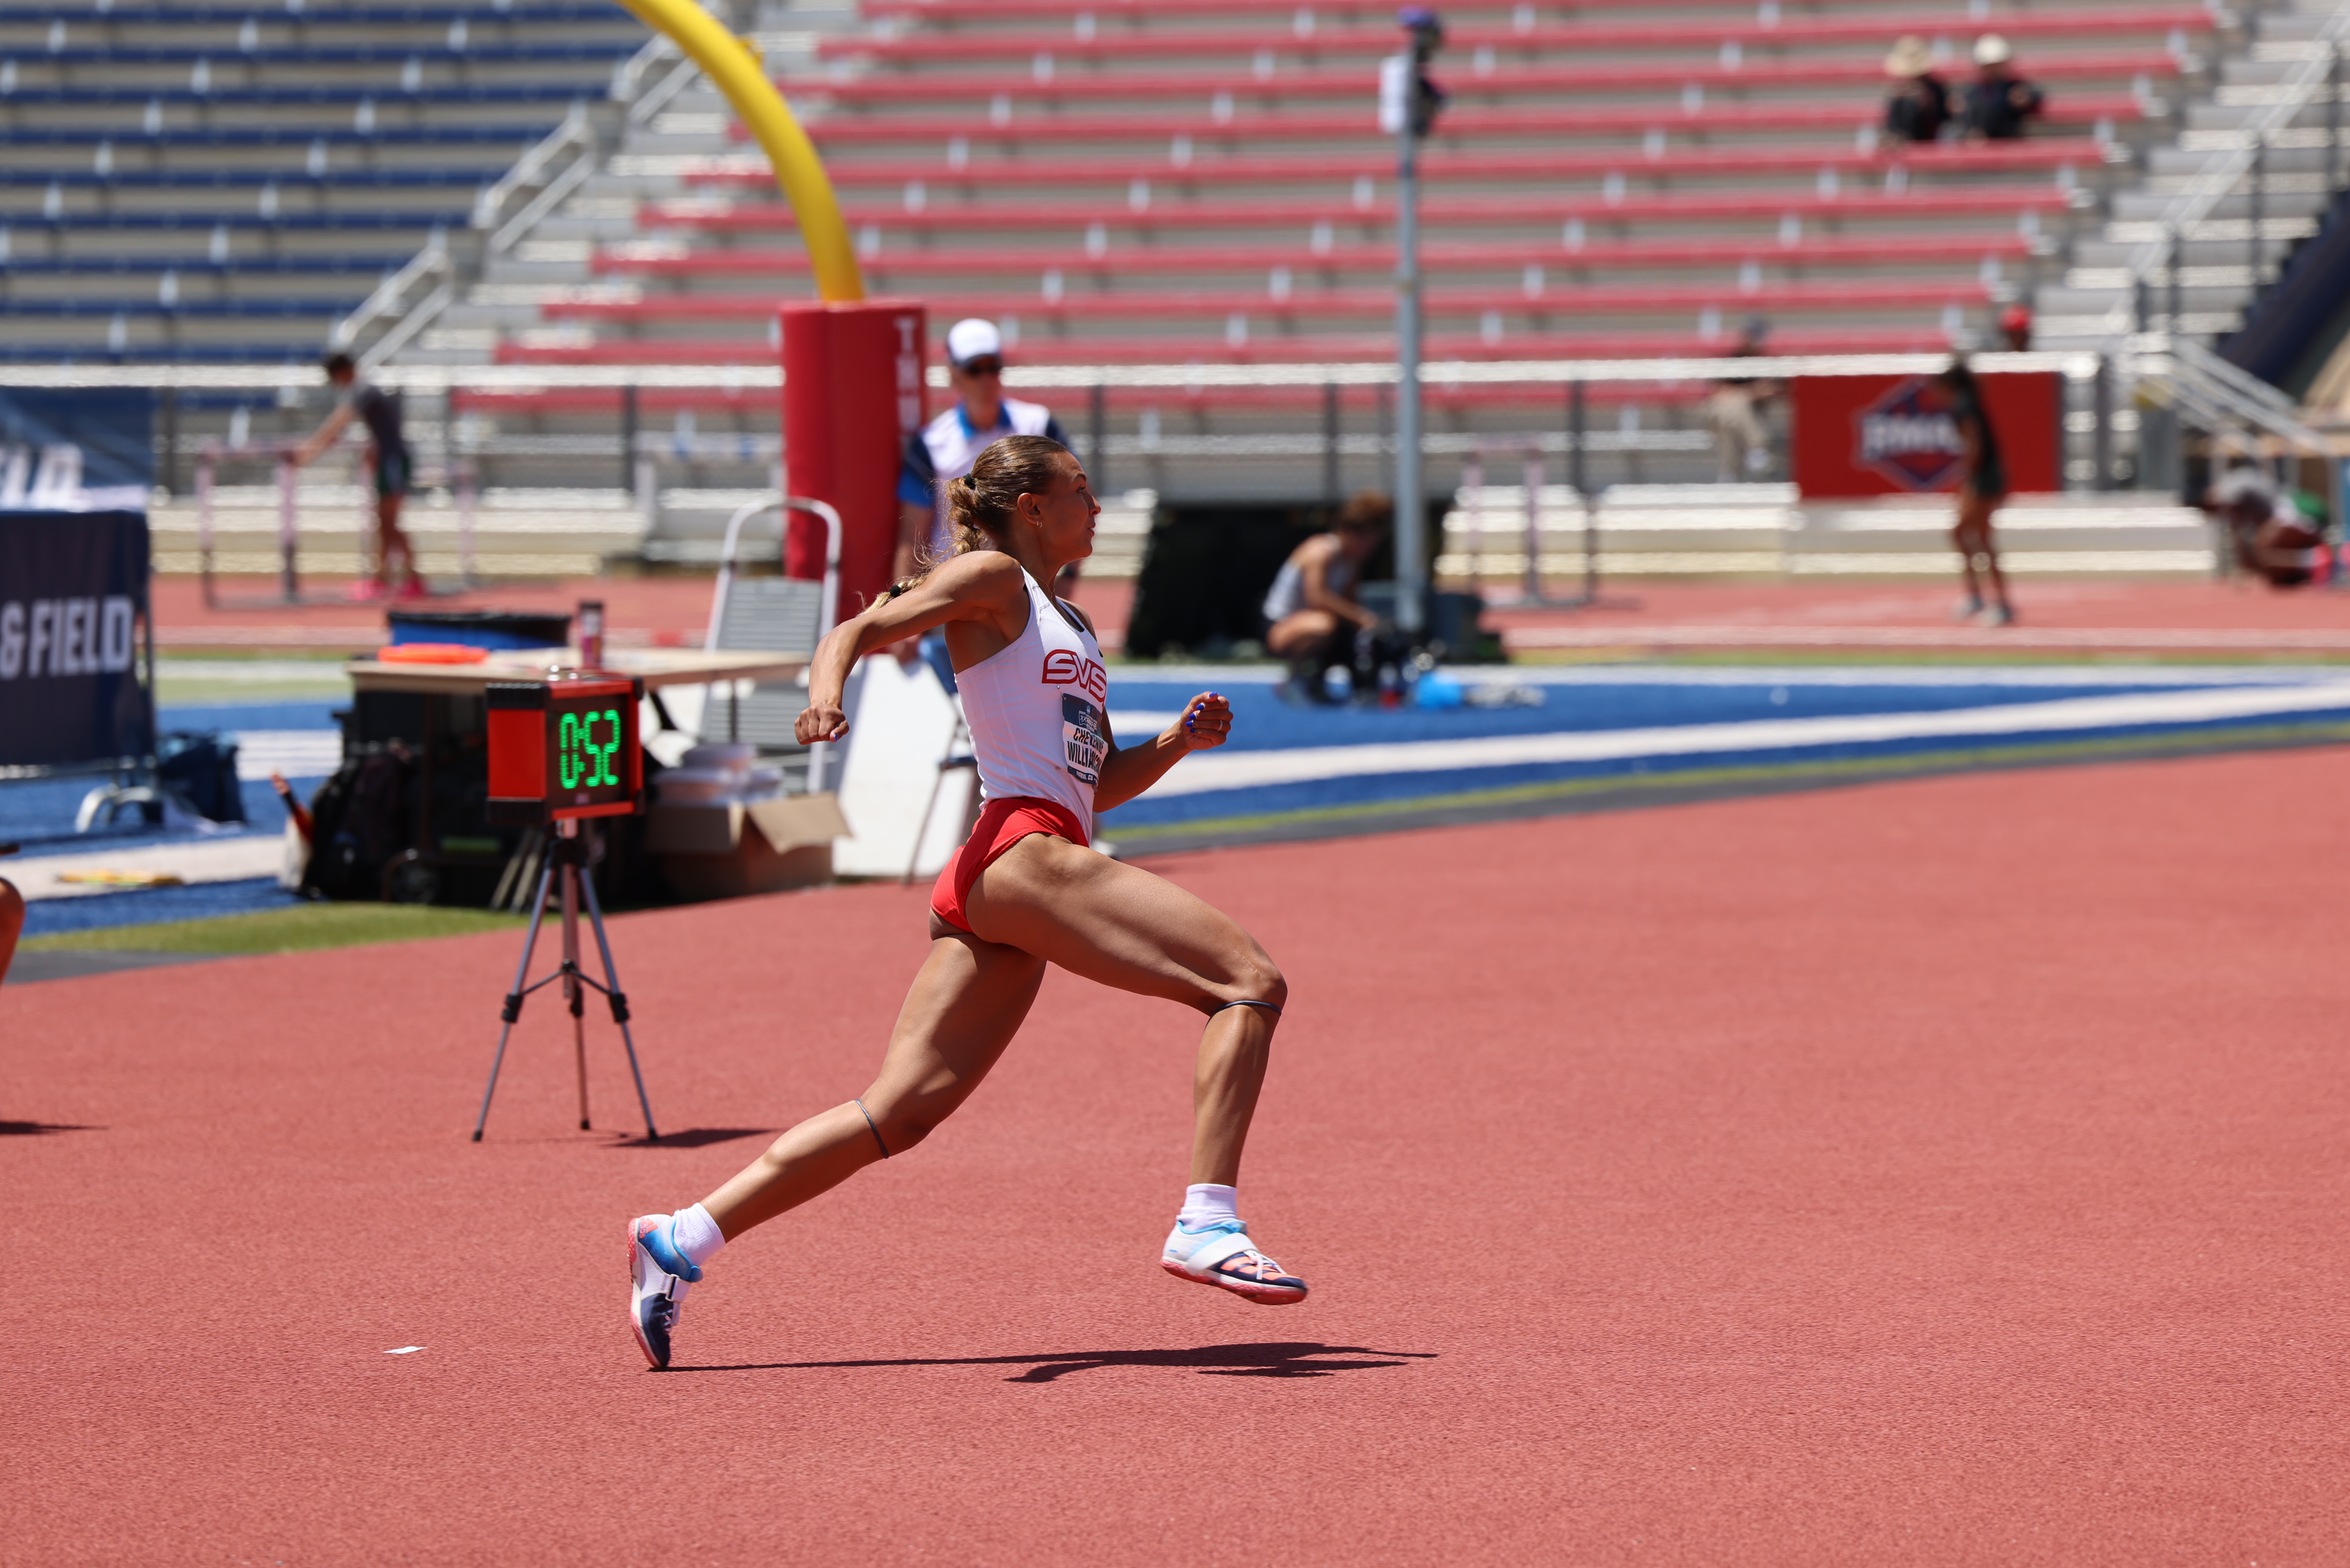 NCAA Track and Field Championships Day 1 highlighted by Williamson's All-American Honors